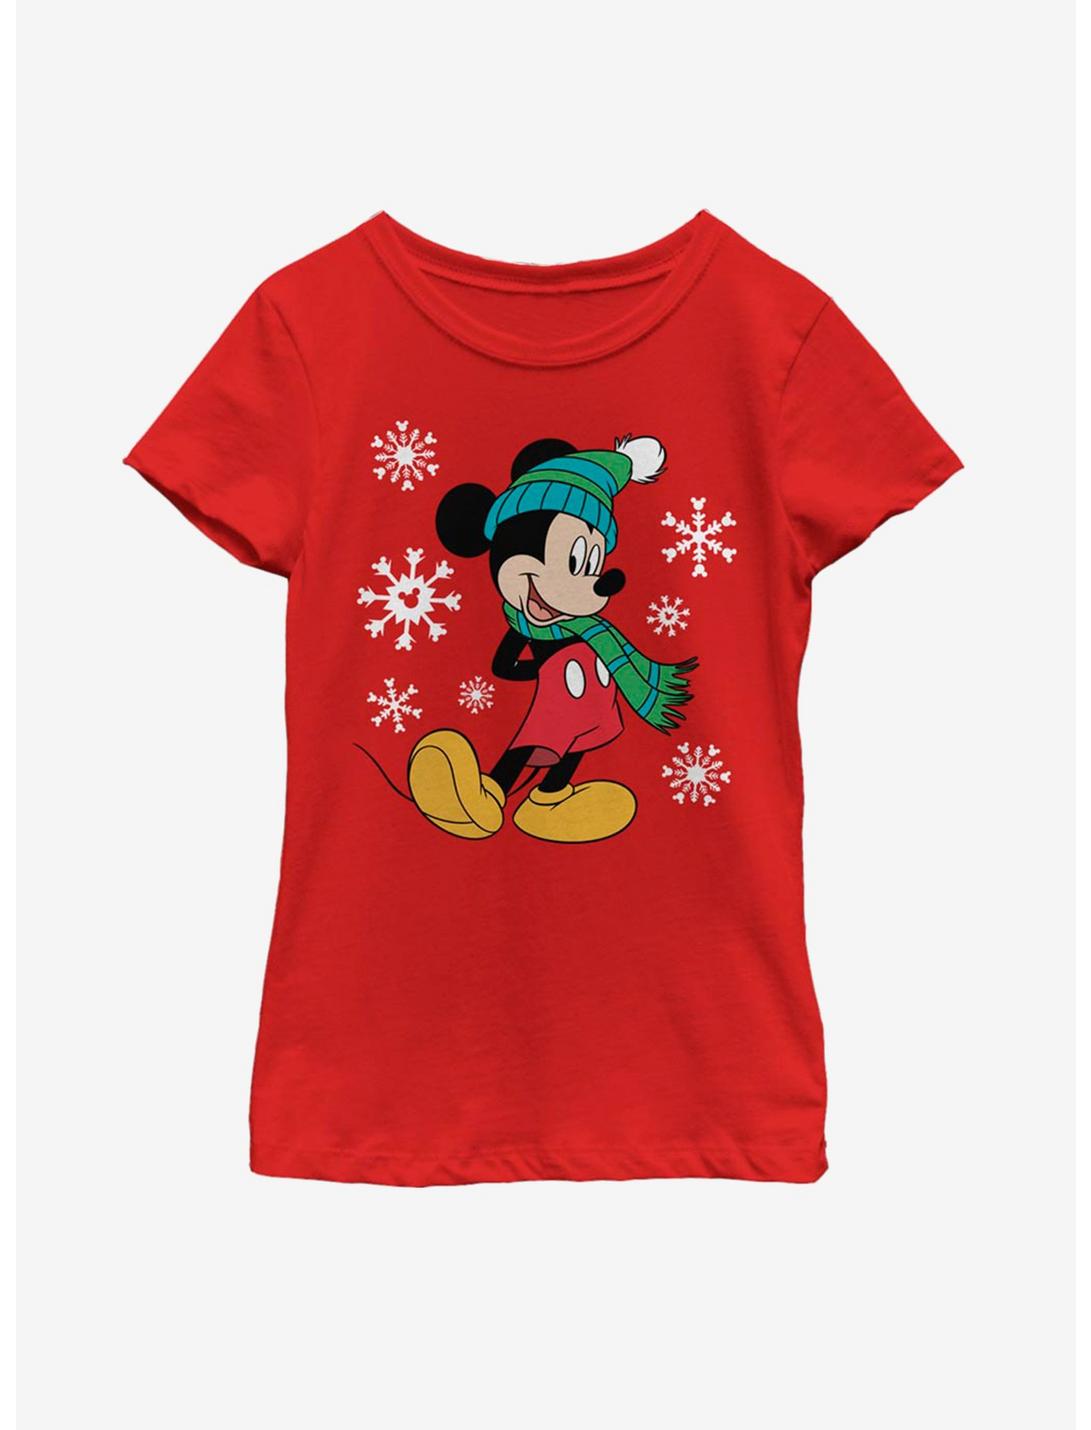 Disney Mickey Mouse Big Holiday Mickey Youth Girls T-Shirt, RED, hi-res